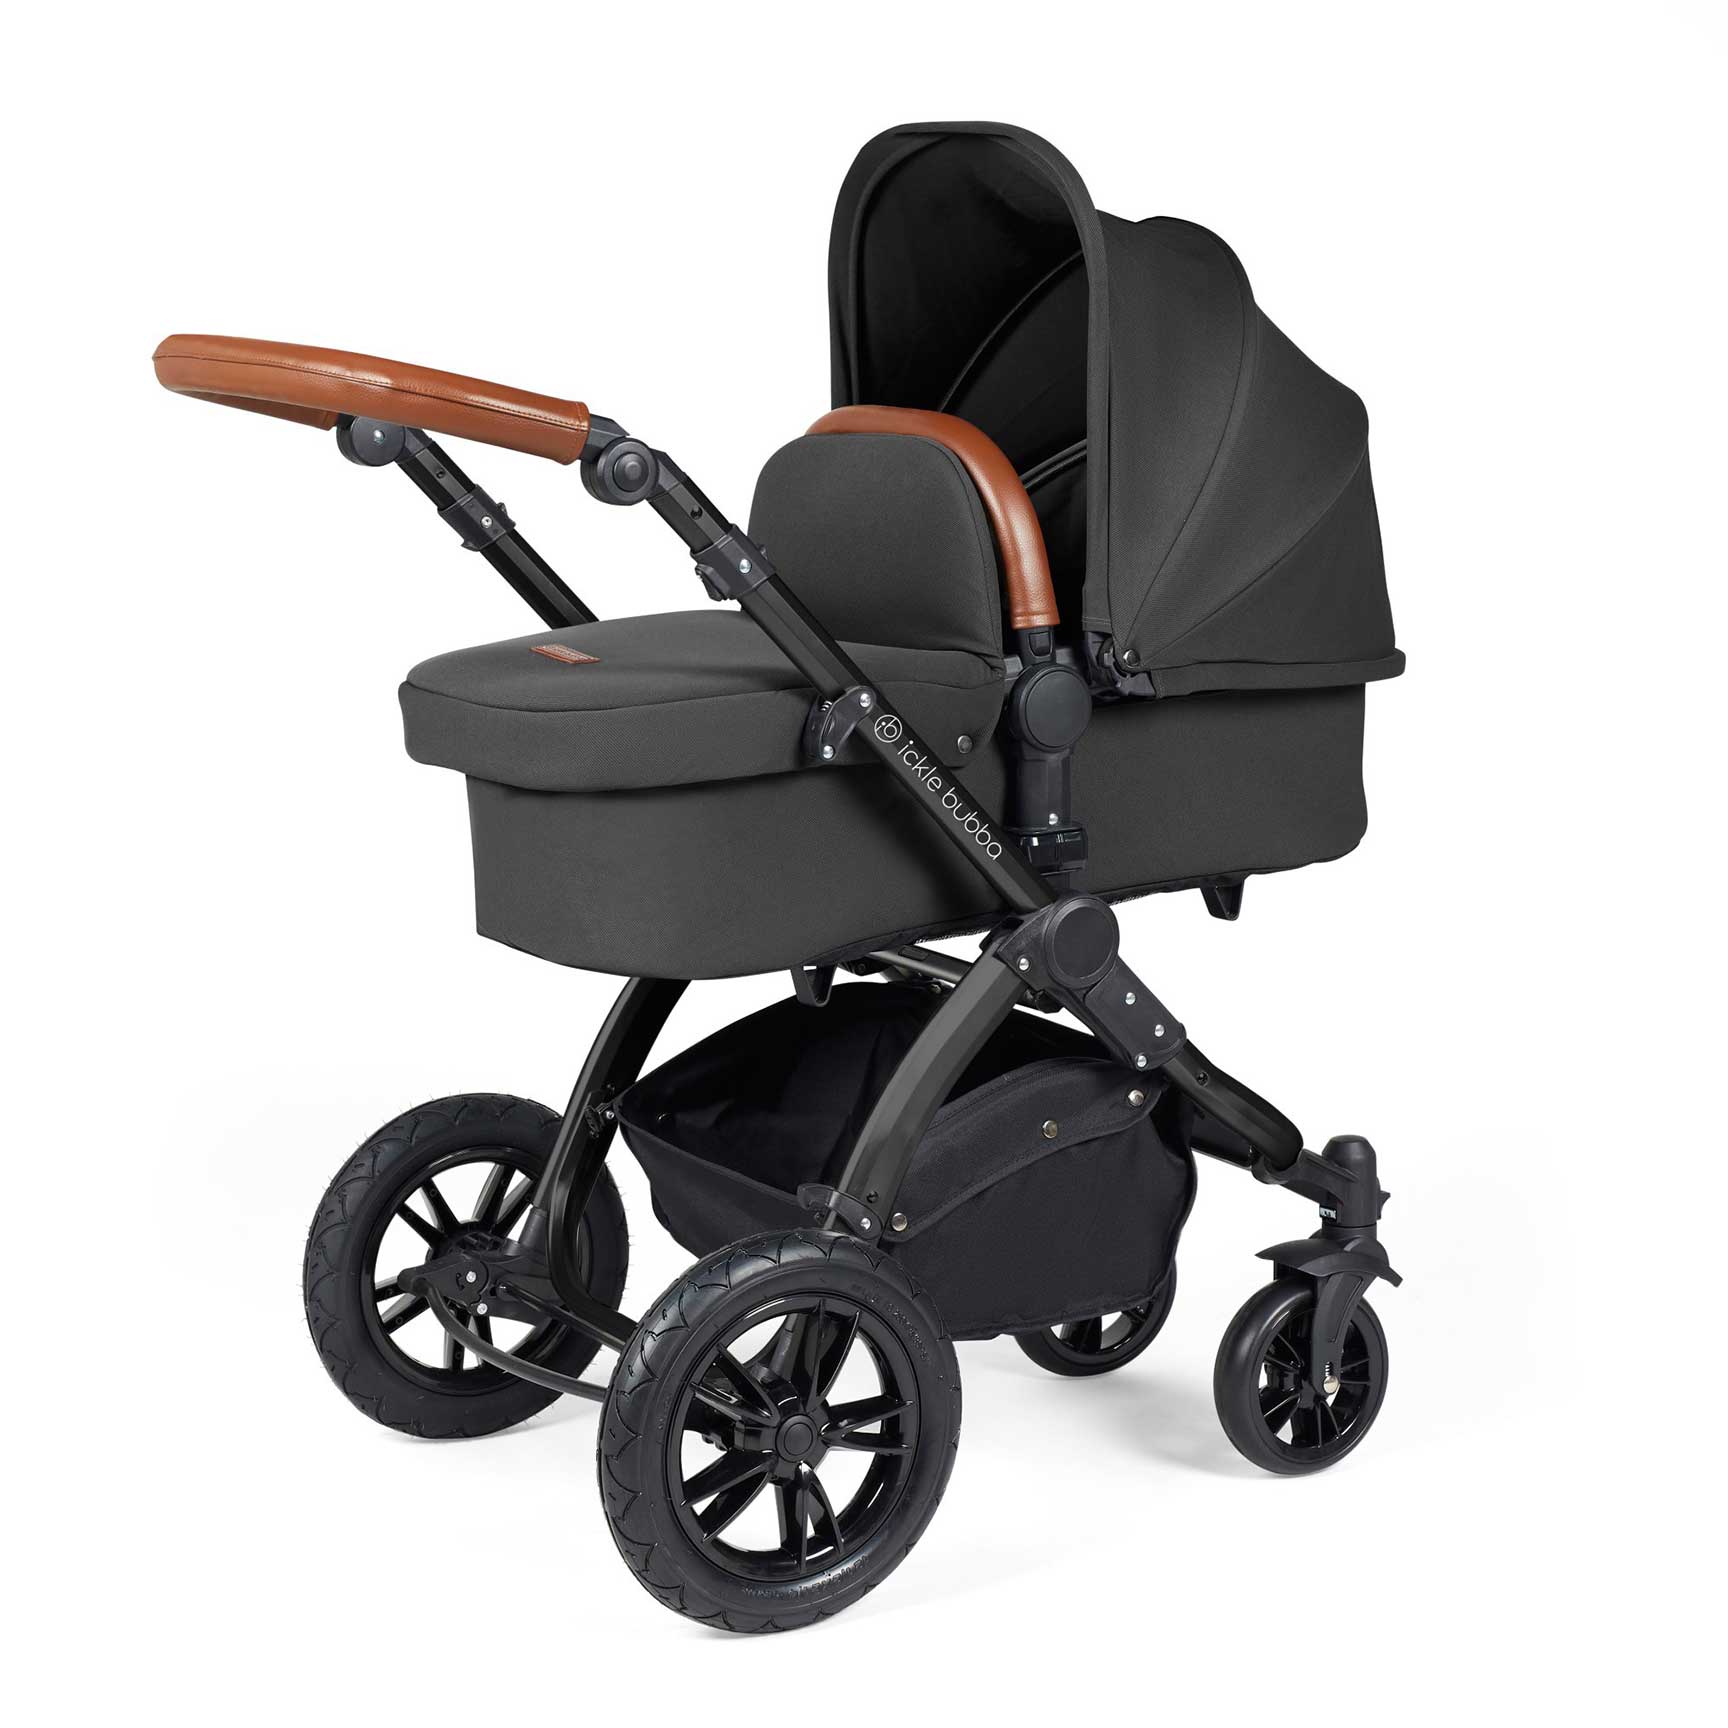 Ickle Bubba travel systems Ickle Bubba Stomp Luxe 2 in 1 Plus Pushchair & Carrycot - Black/Charcoal Grey/Tan 10-003-001-207